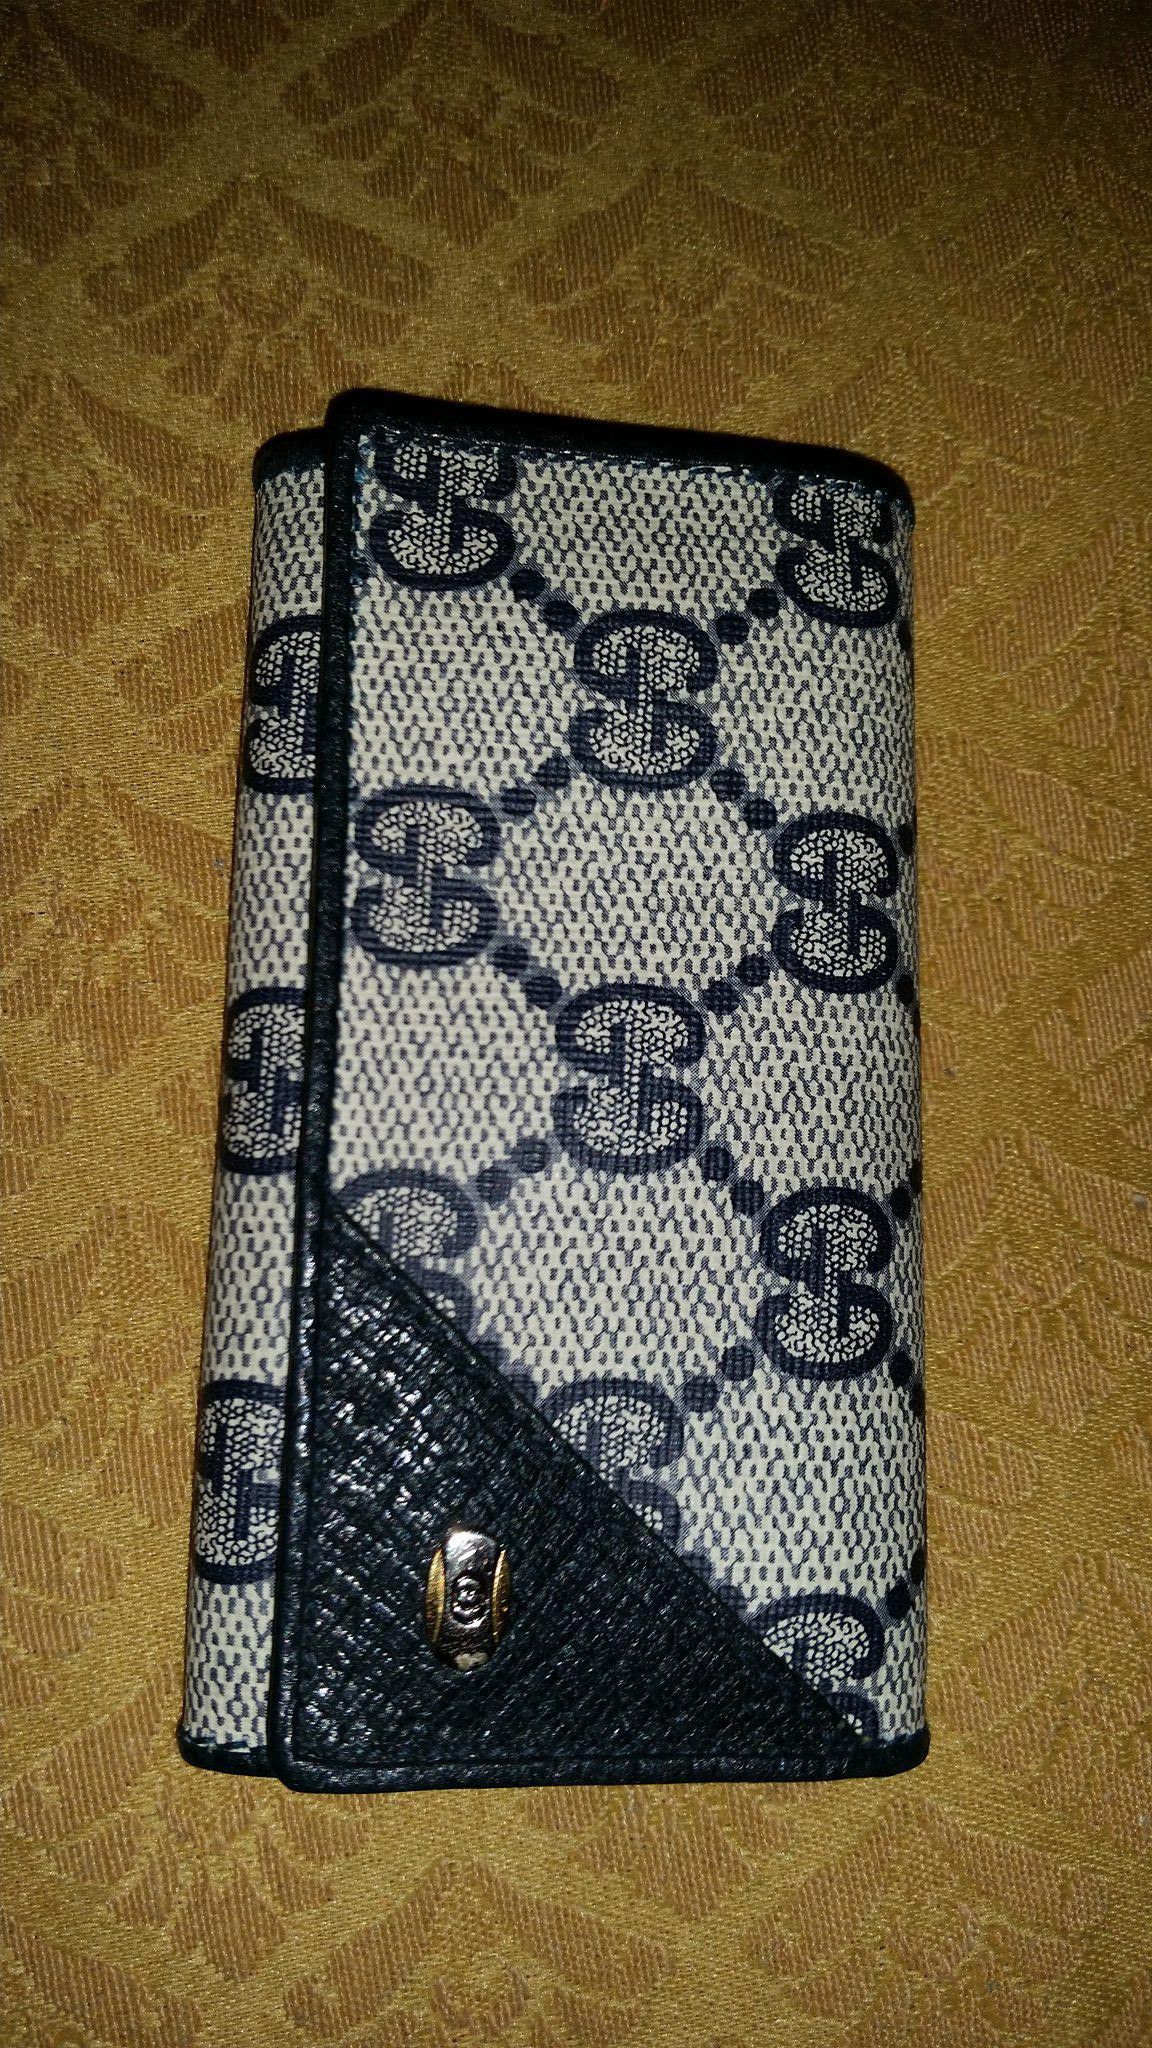 Authentic Gucci keys holder